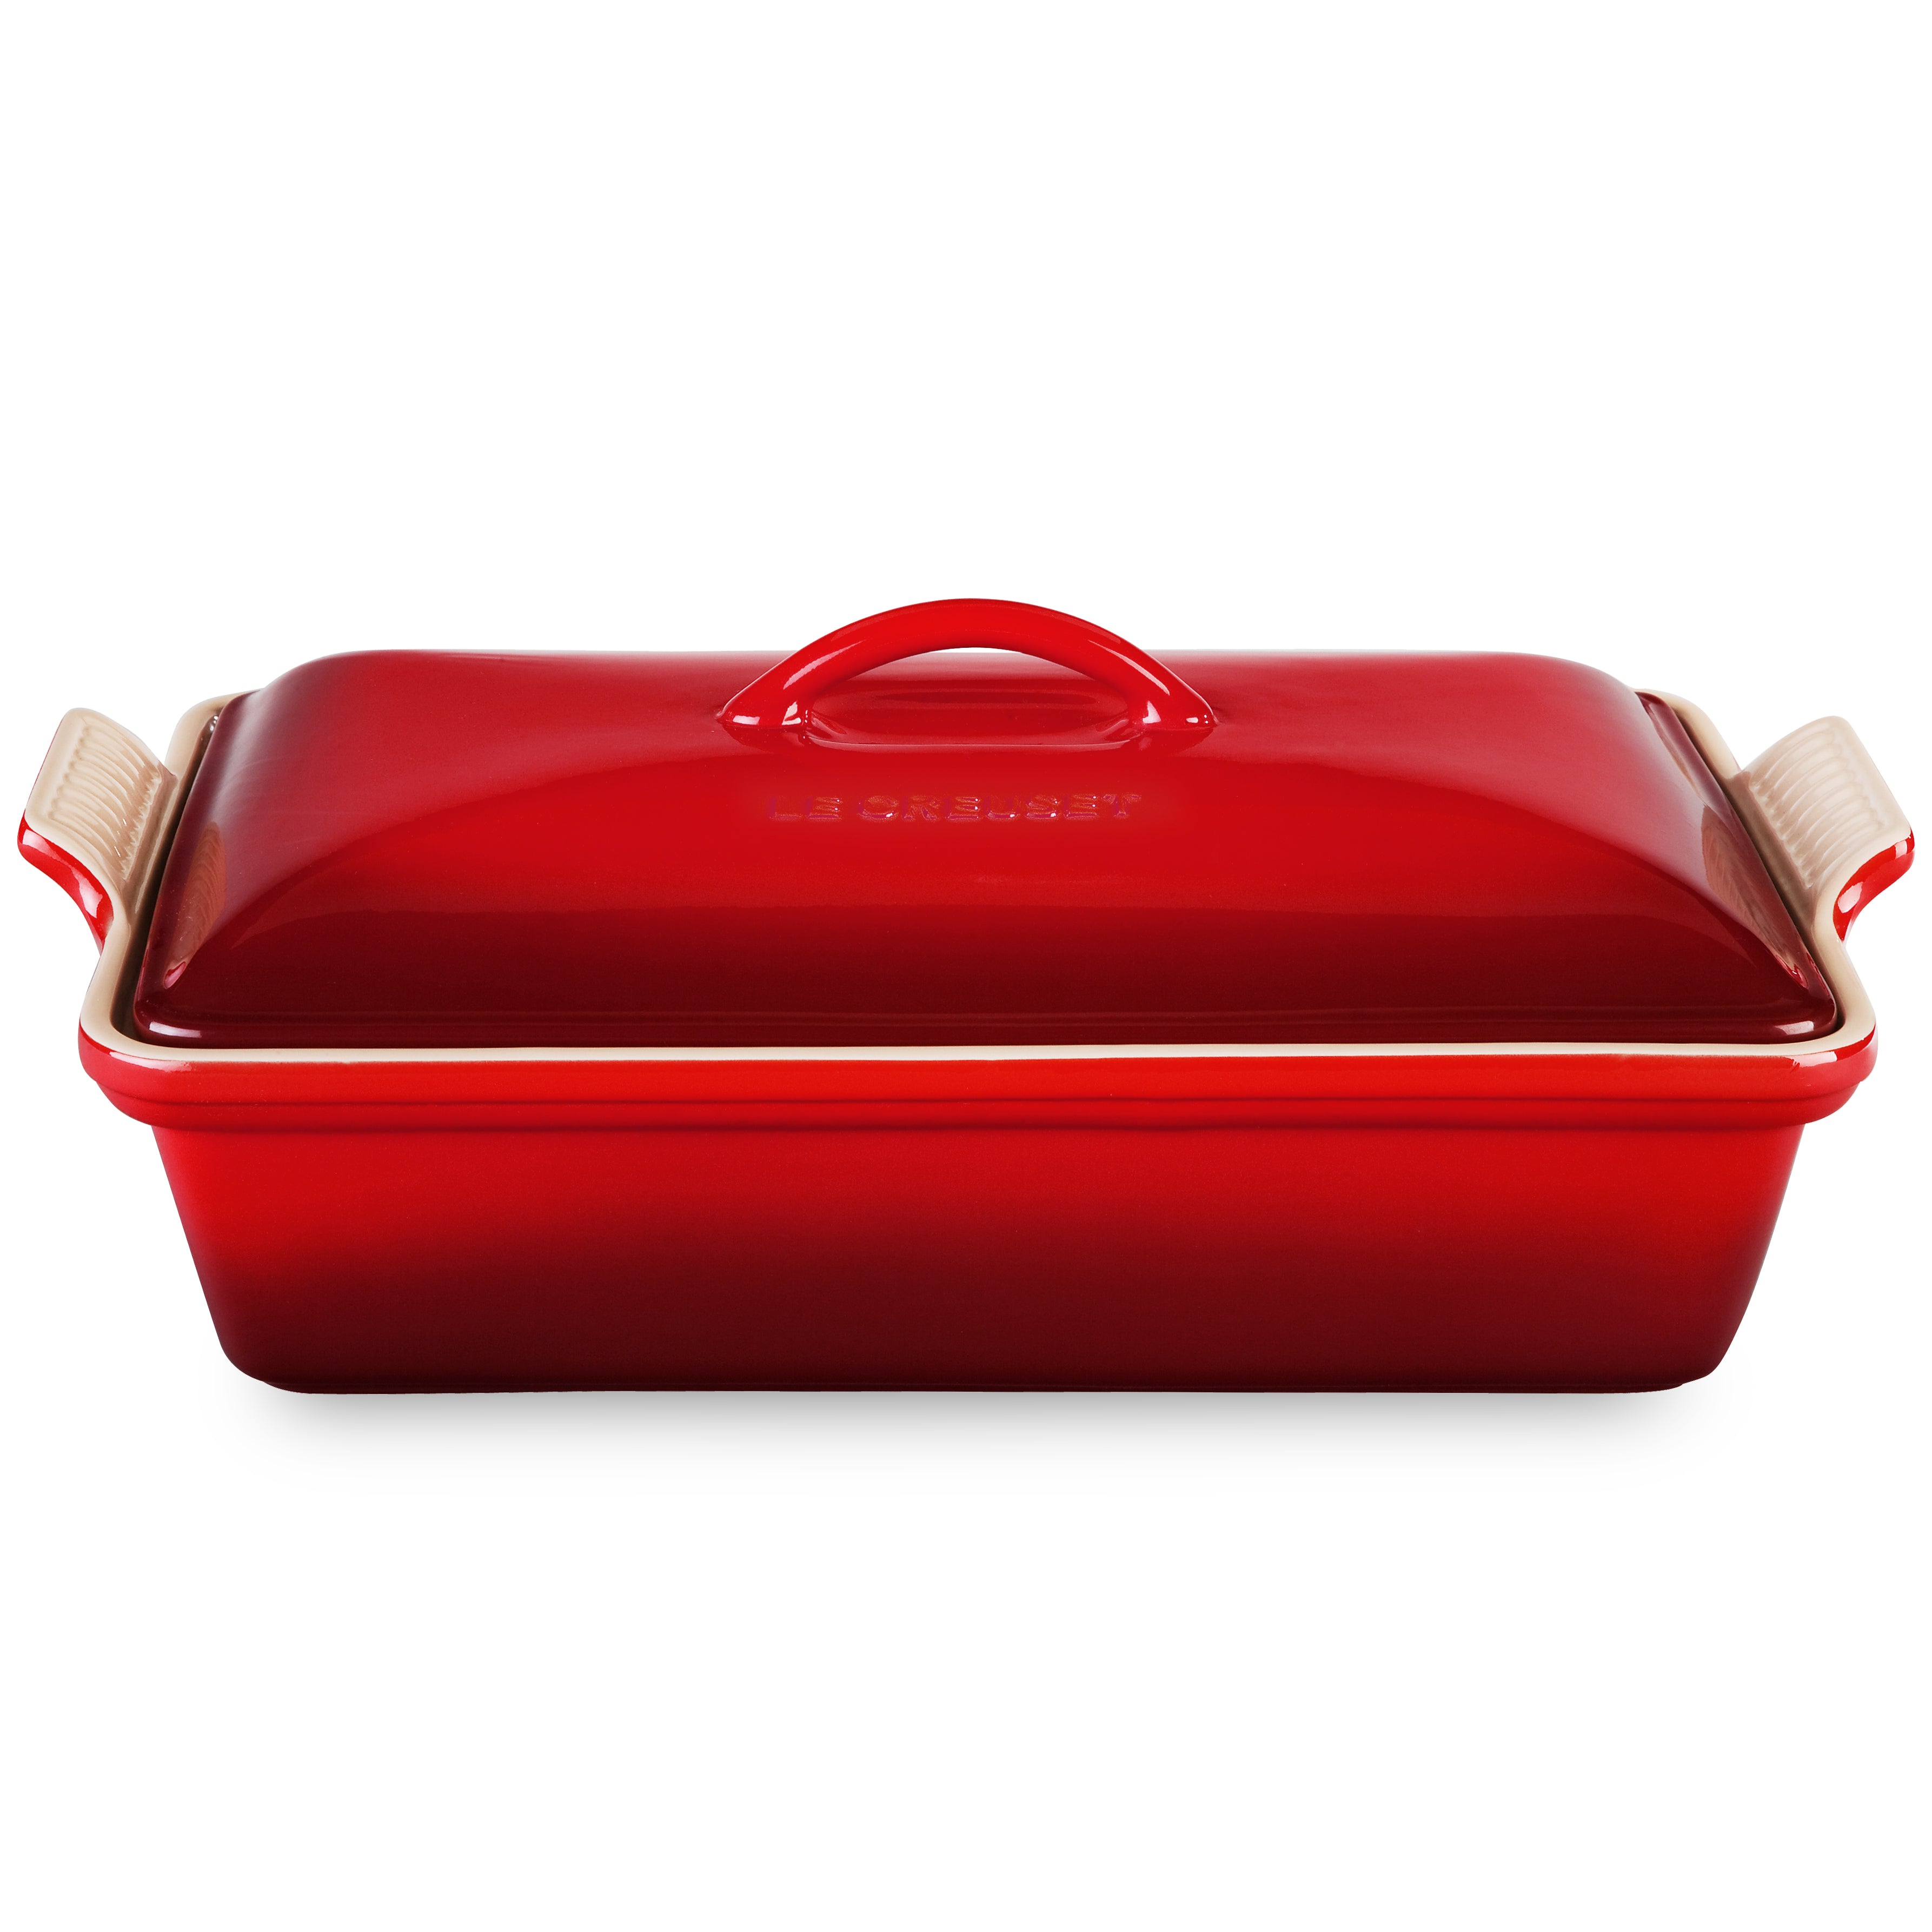 Le Creuset Tradition extra large rectangular grill 47x25 cm.